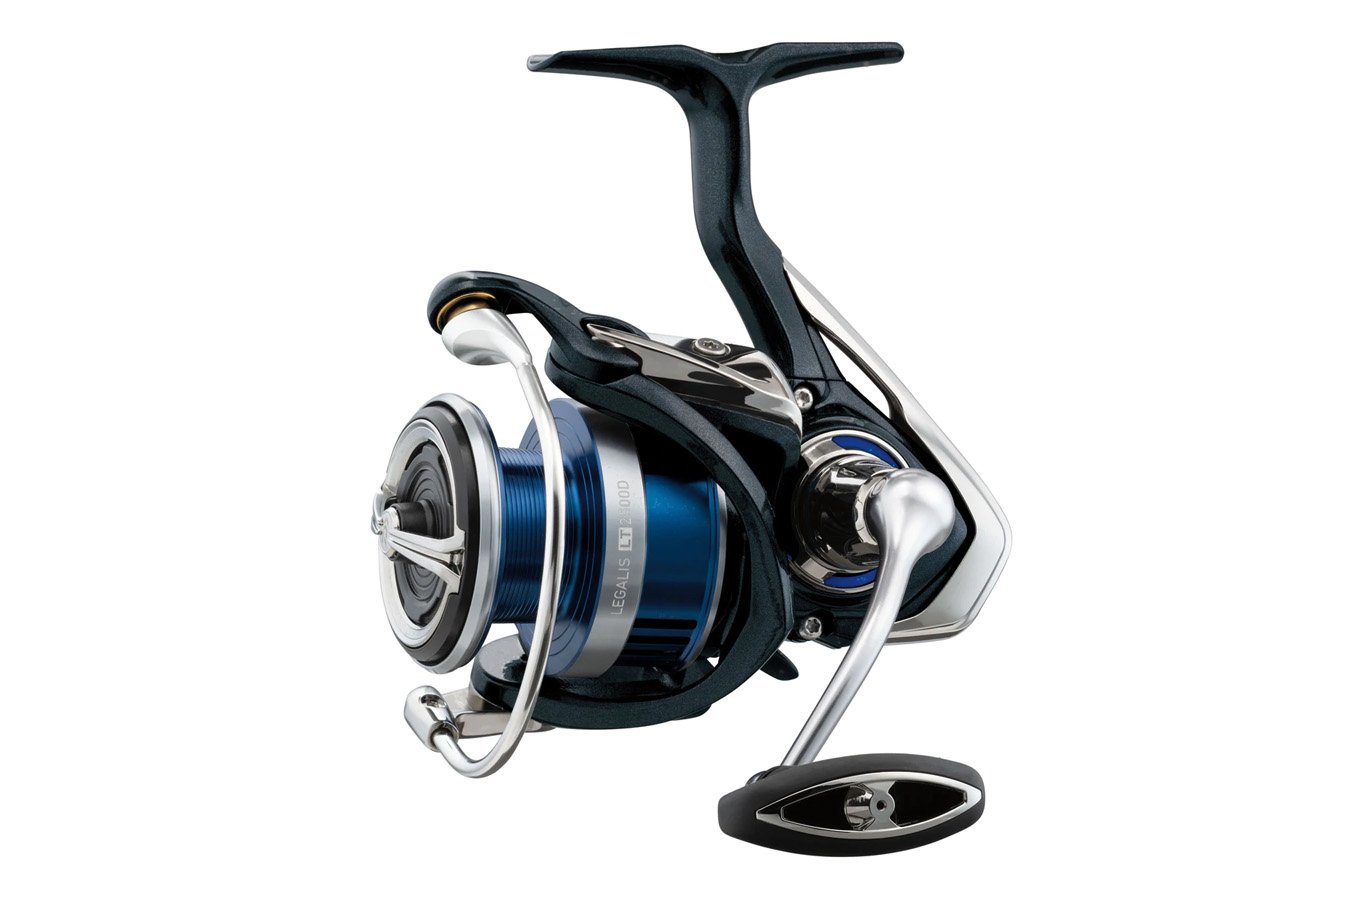 Discount Daiwa Legalis LT 5.3:1 Spinning Reel for Sale